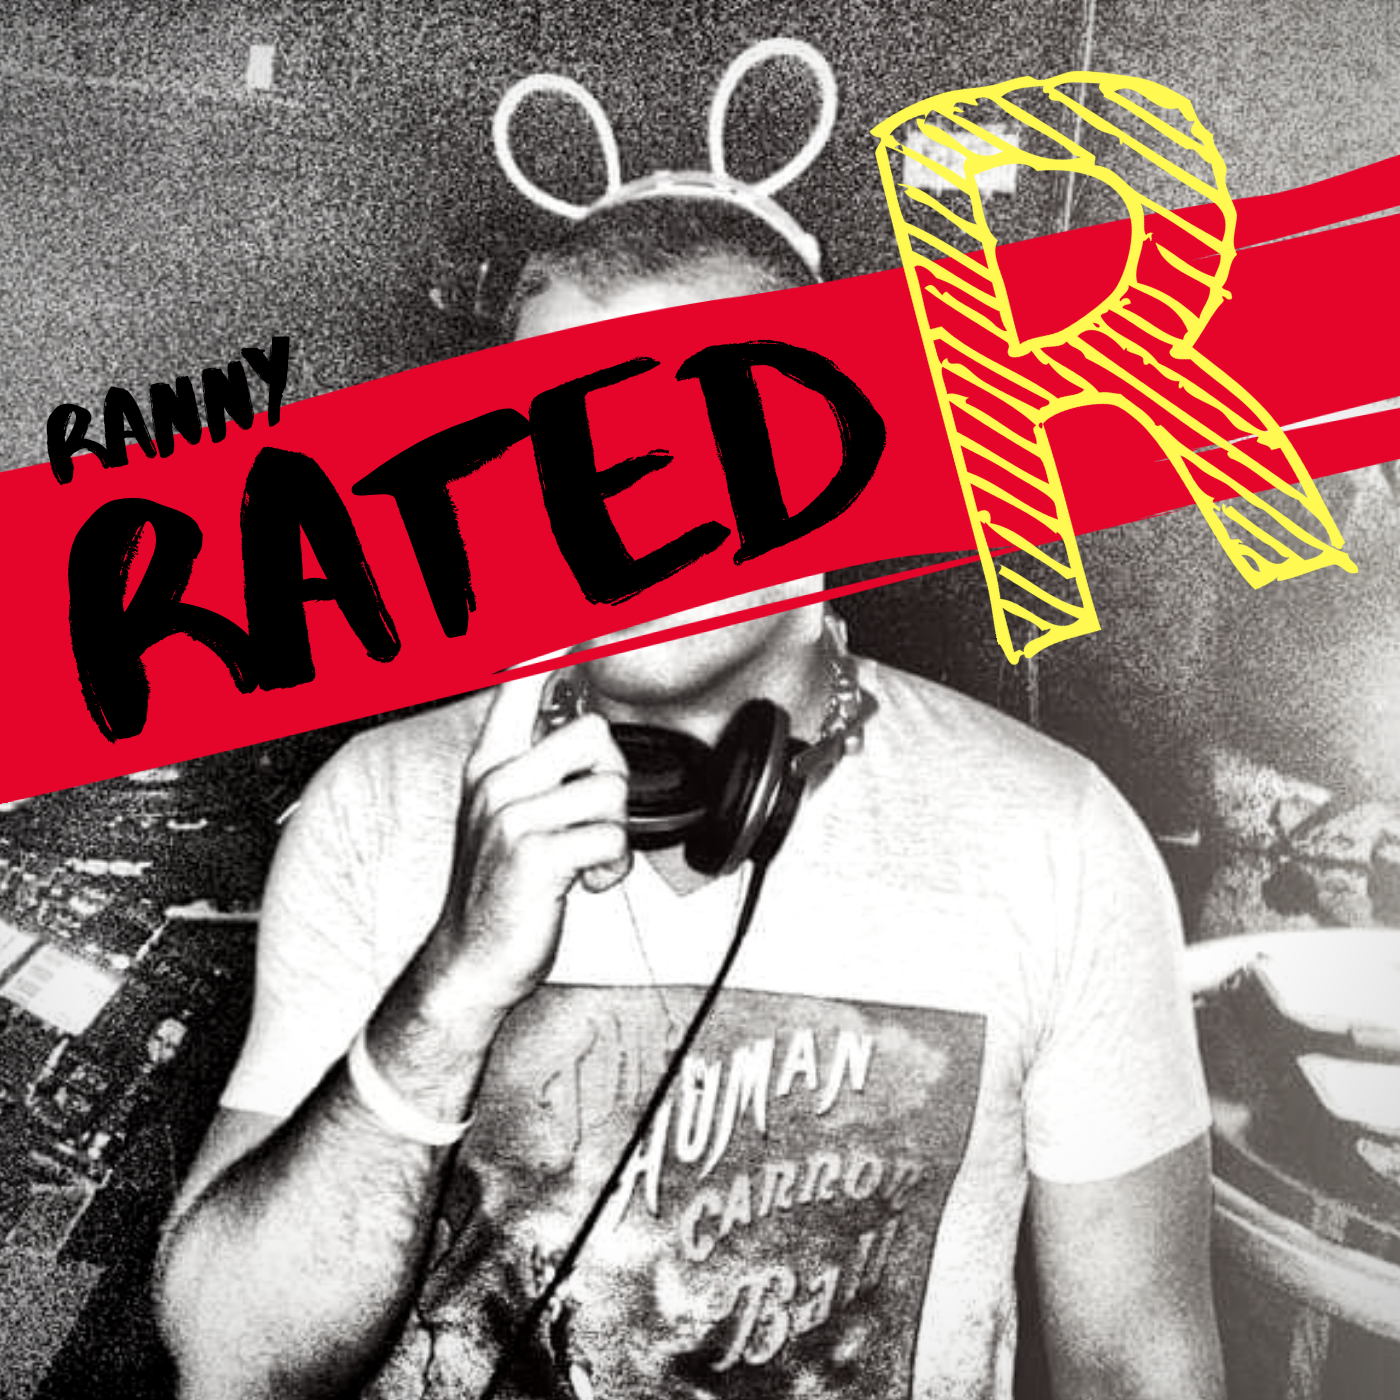 Ranny: Rated R